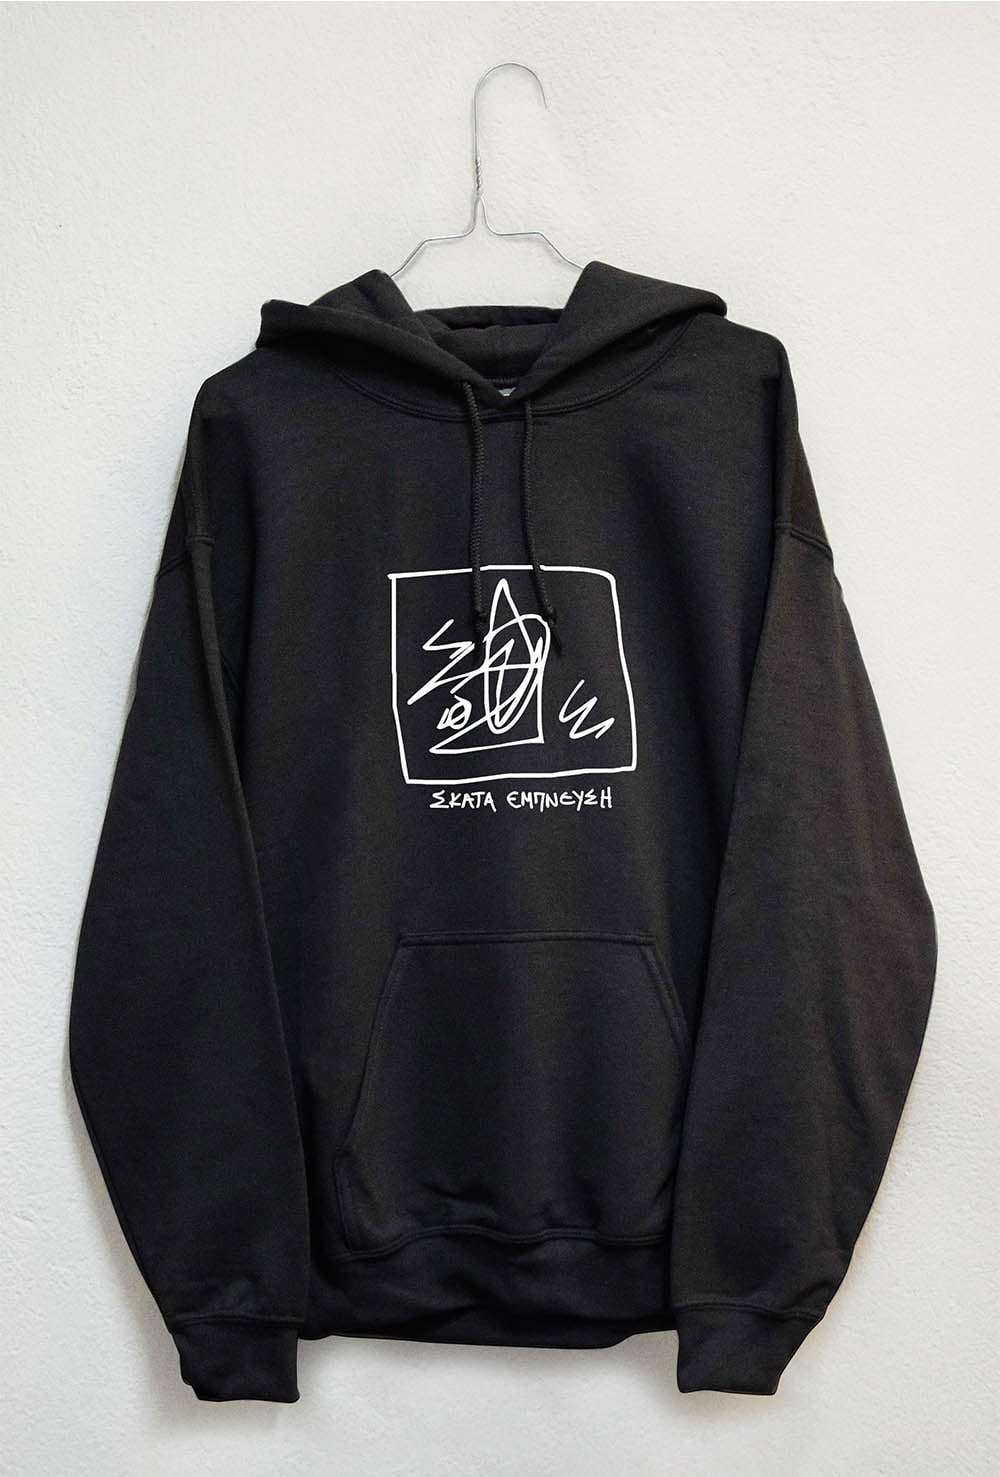 Subworks black hoodie About shitty inspiration